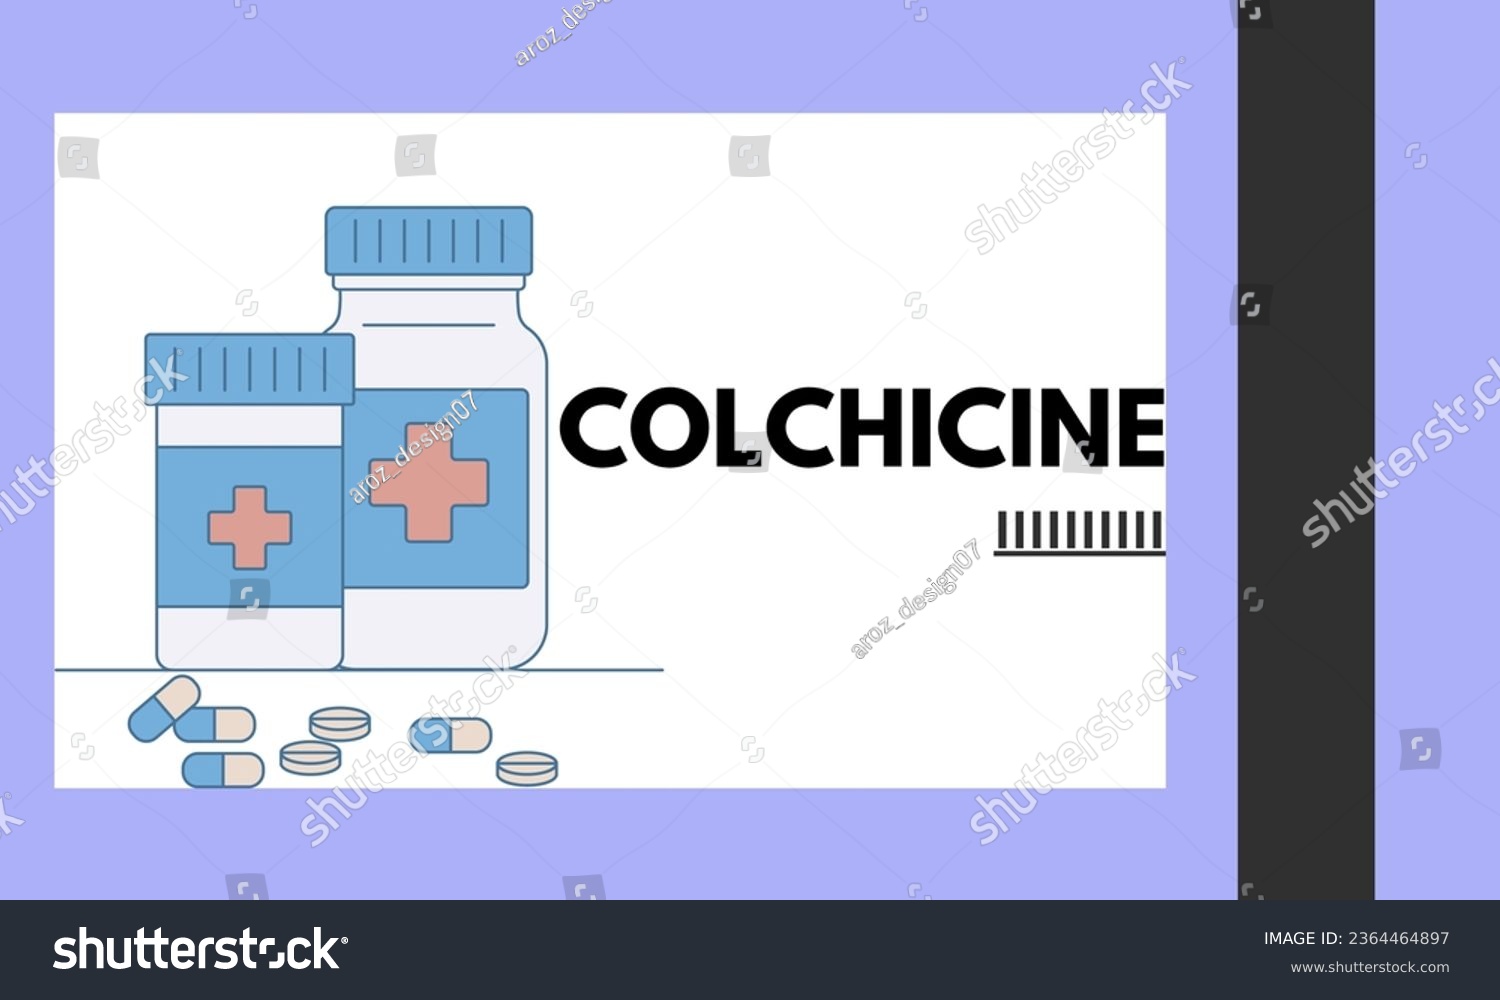 SVG of Colchicine tablet close up of medication used to treat gout and Behcet disease, pericarditis. Vector illustration  svg